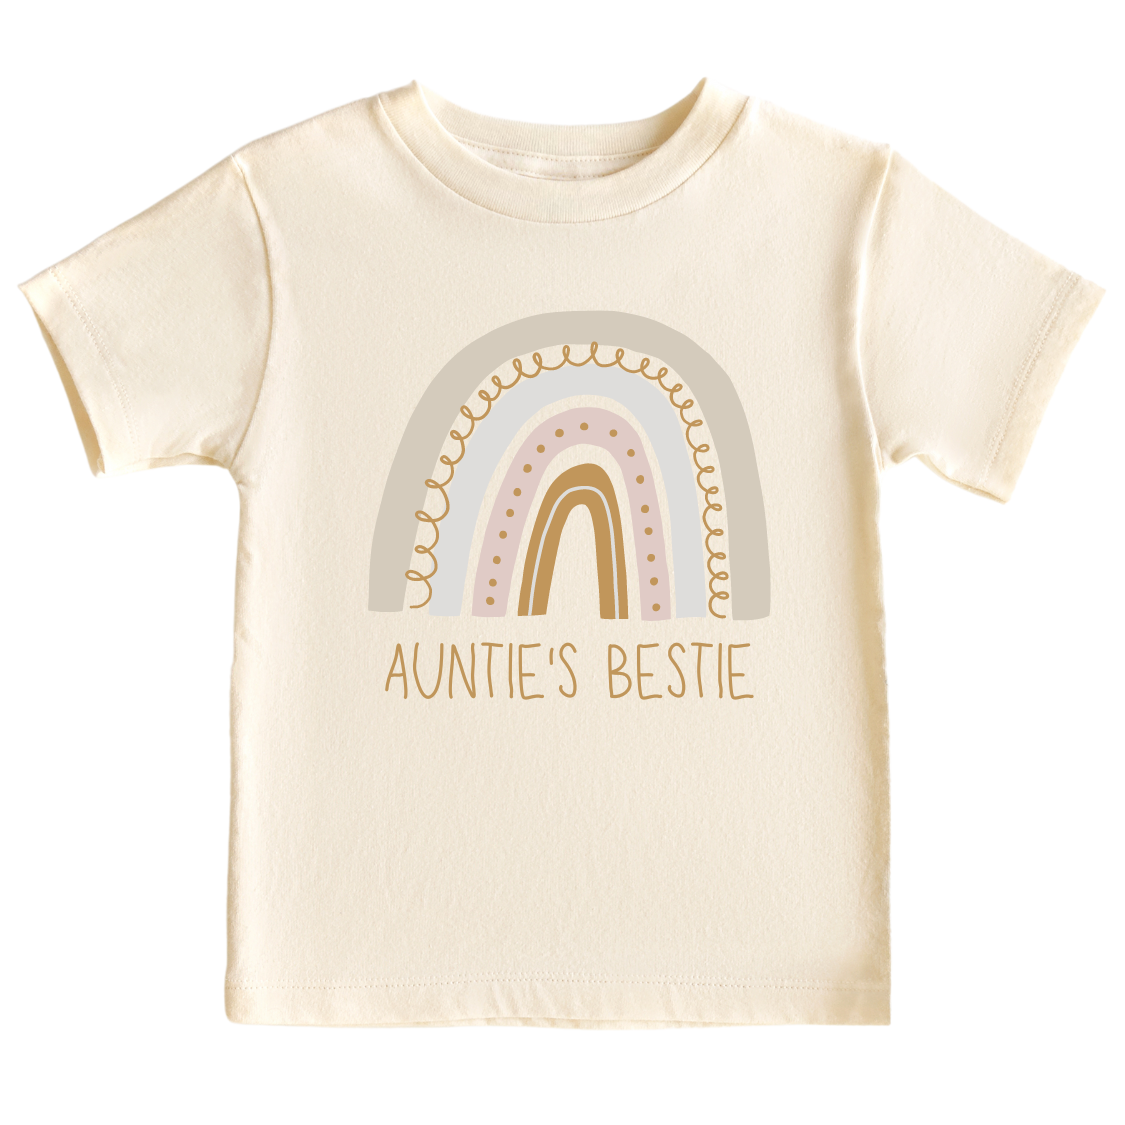 A colorful kid's t-shirt adorned with a delightful printed graphic of a radiant rainbow and the text 'Auntie's Bestie.' This charming tee celebrates the cherished bond between a beloved aunt and her adored niece or nephew.